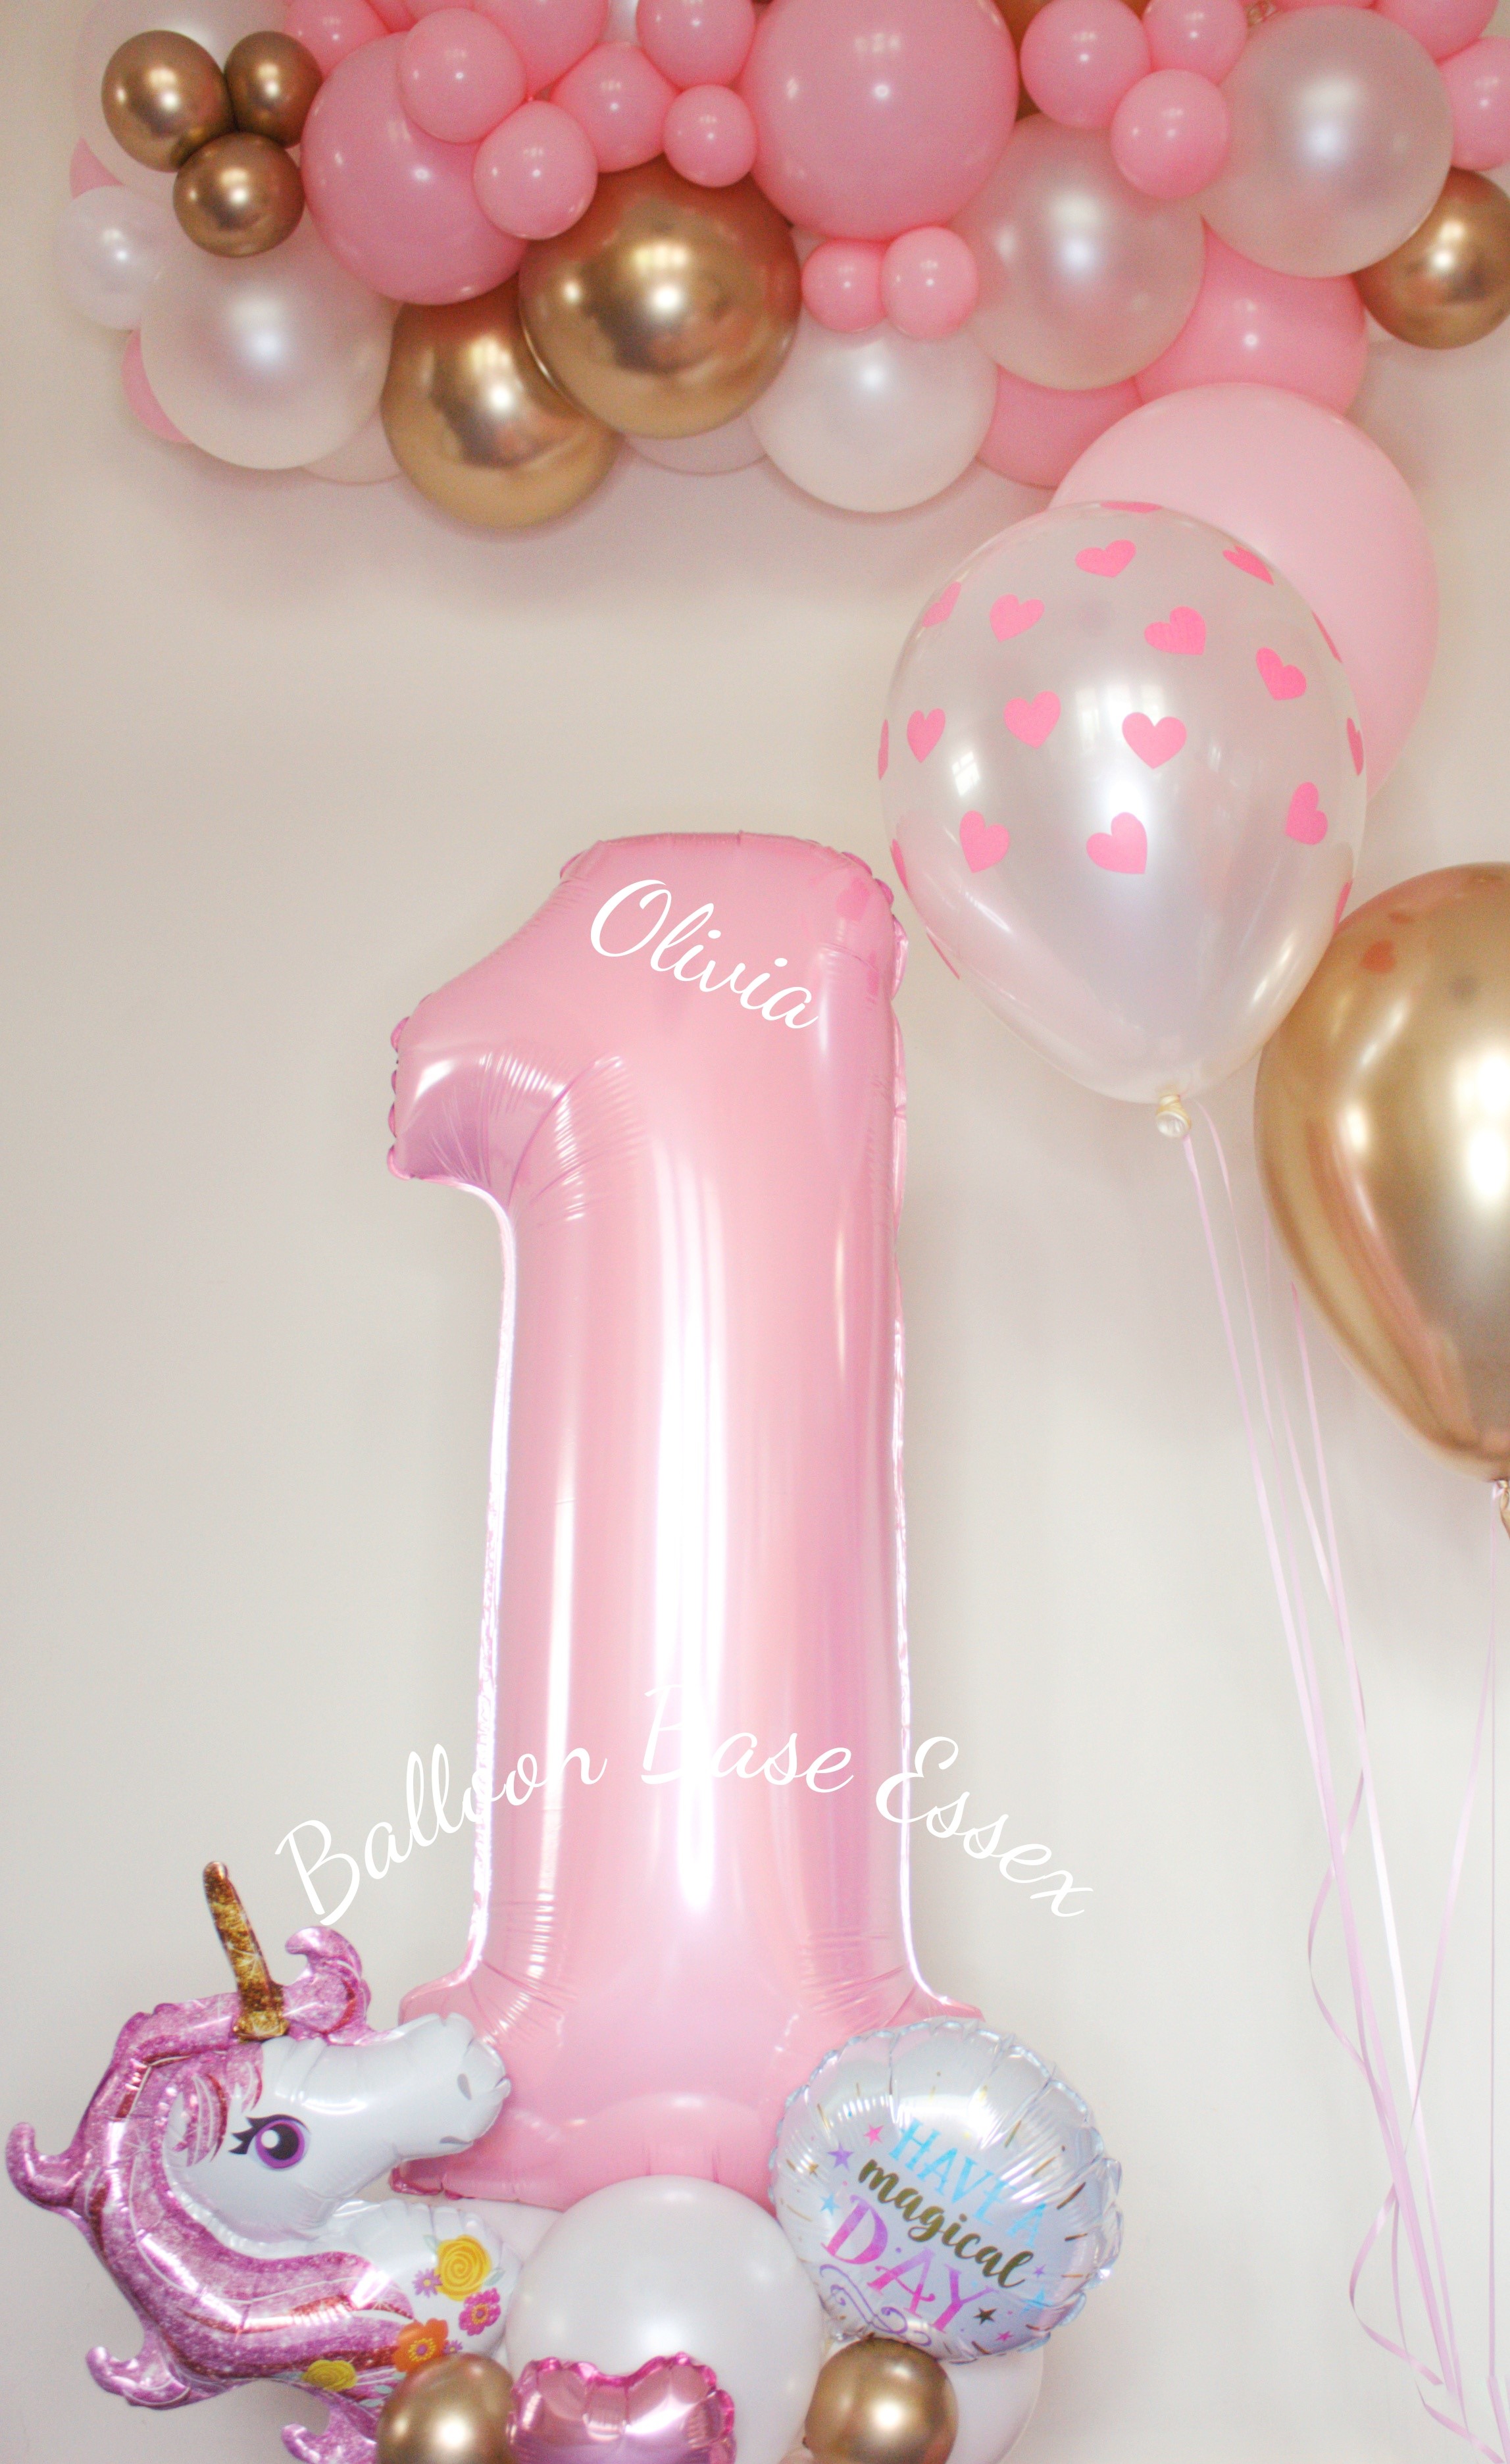 Pastel pink number 1 number on a pink unicorn themed balloon base with matching garland above and helium balloons